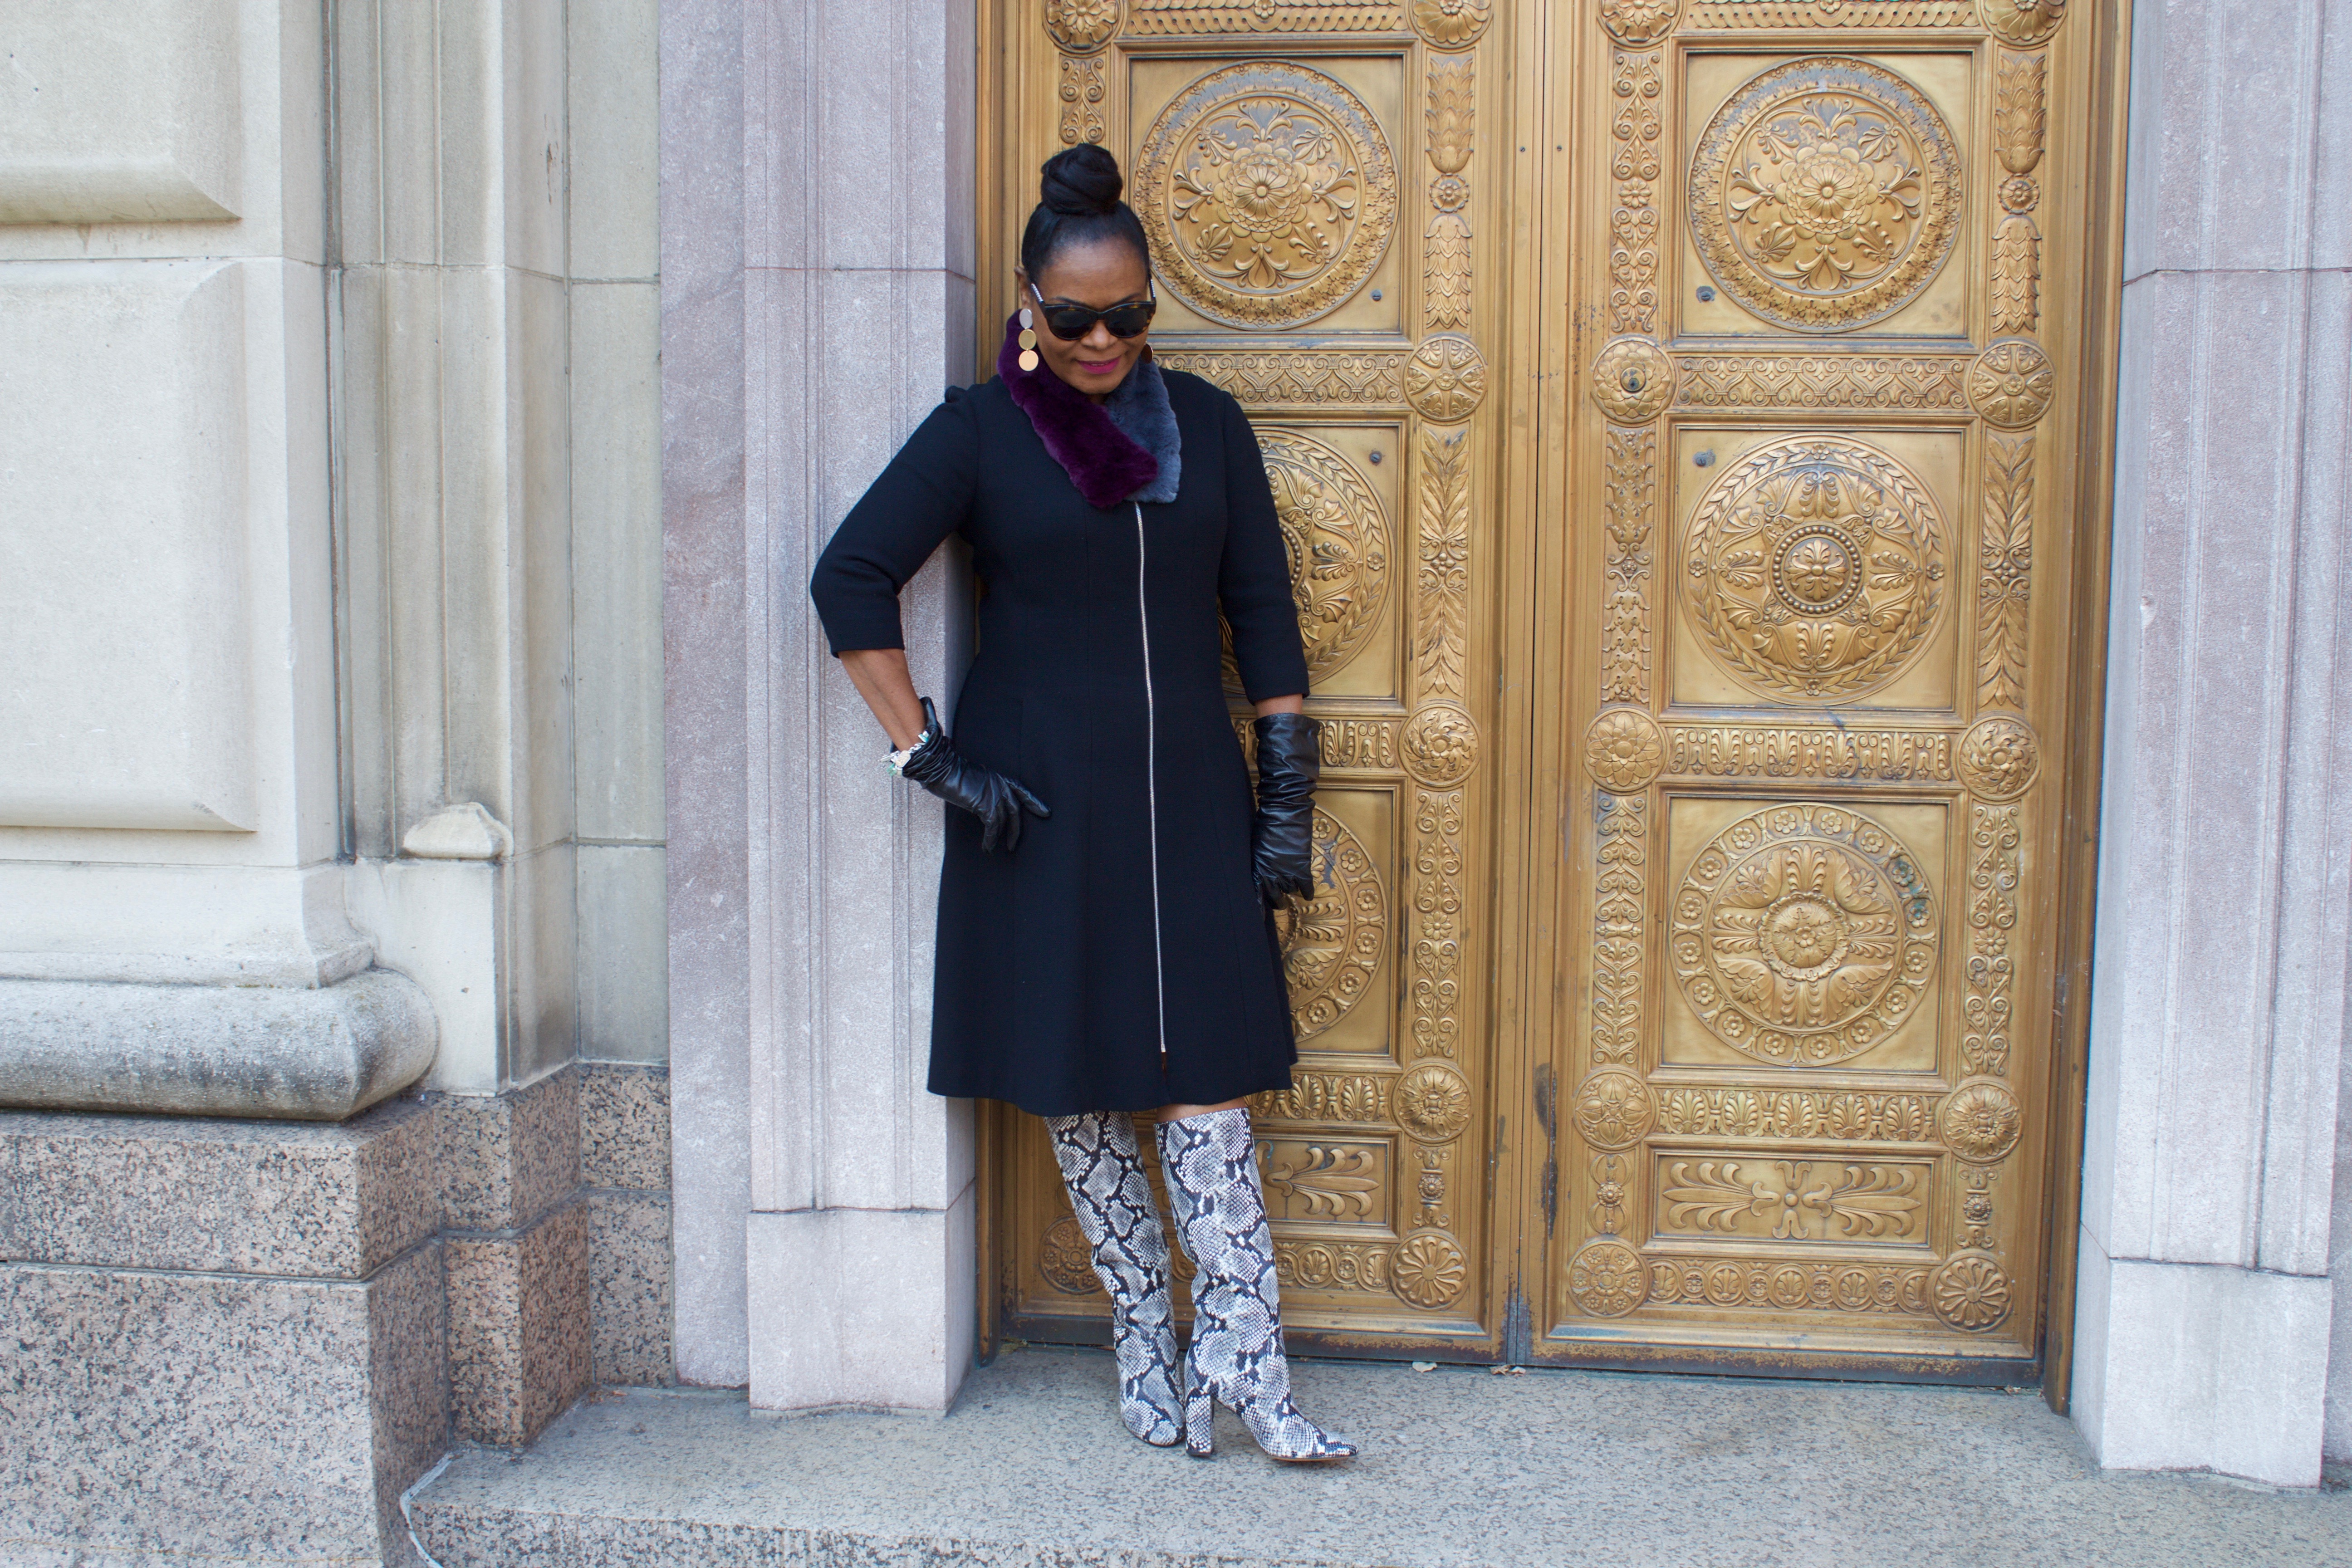 Verizon Building Gold Door on Downtown Harrisburg, PA; J.Crew Tall-Heel Boot in Faux Snakeskin; Python Tall Boots